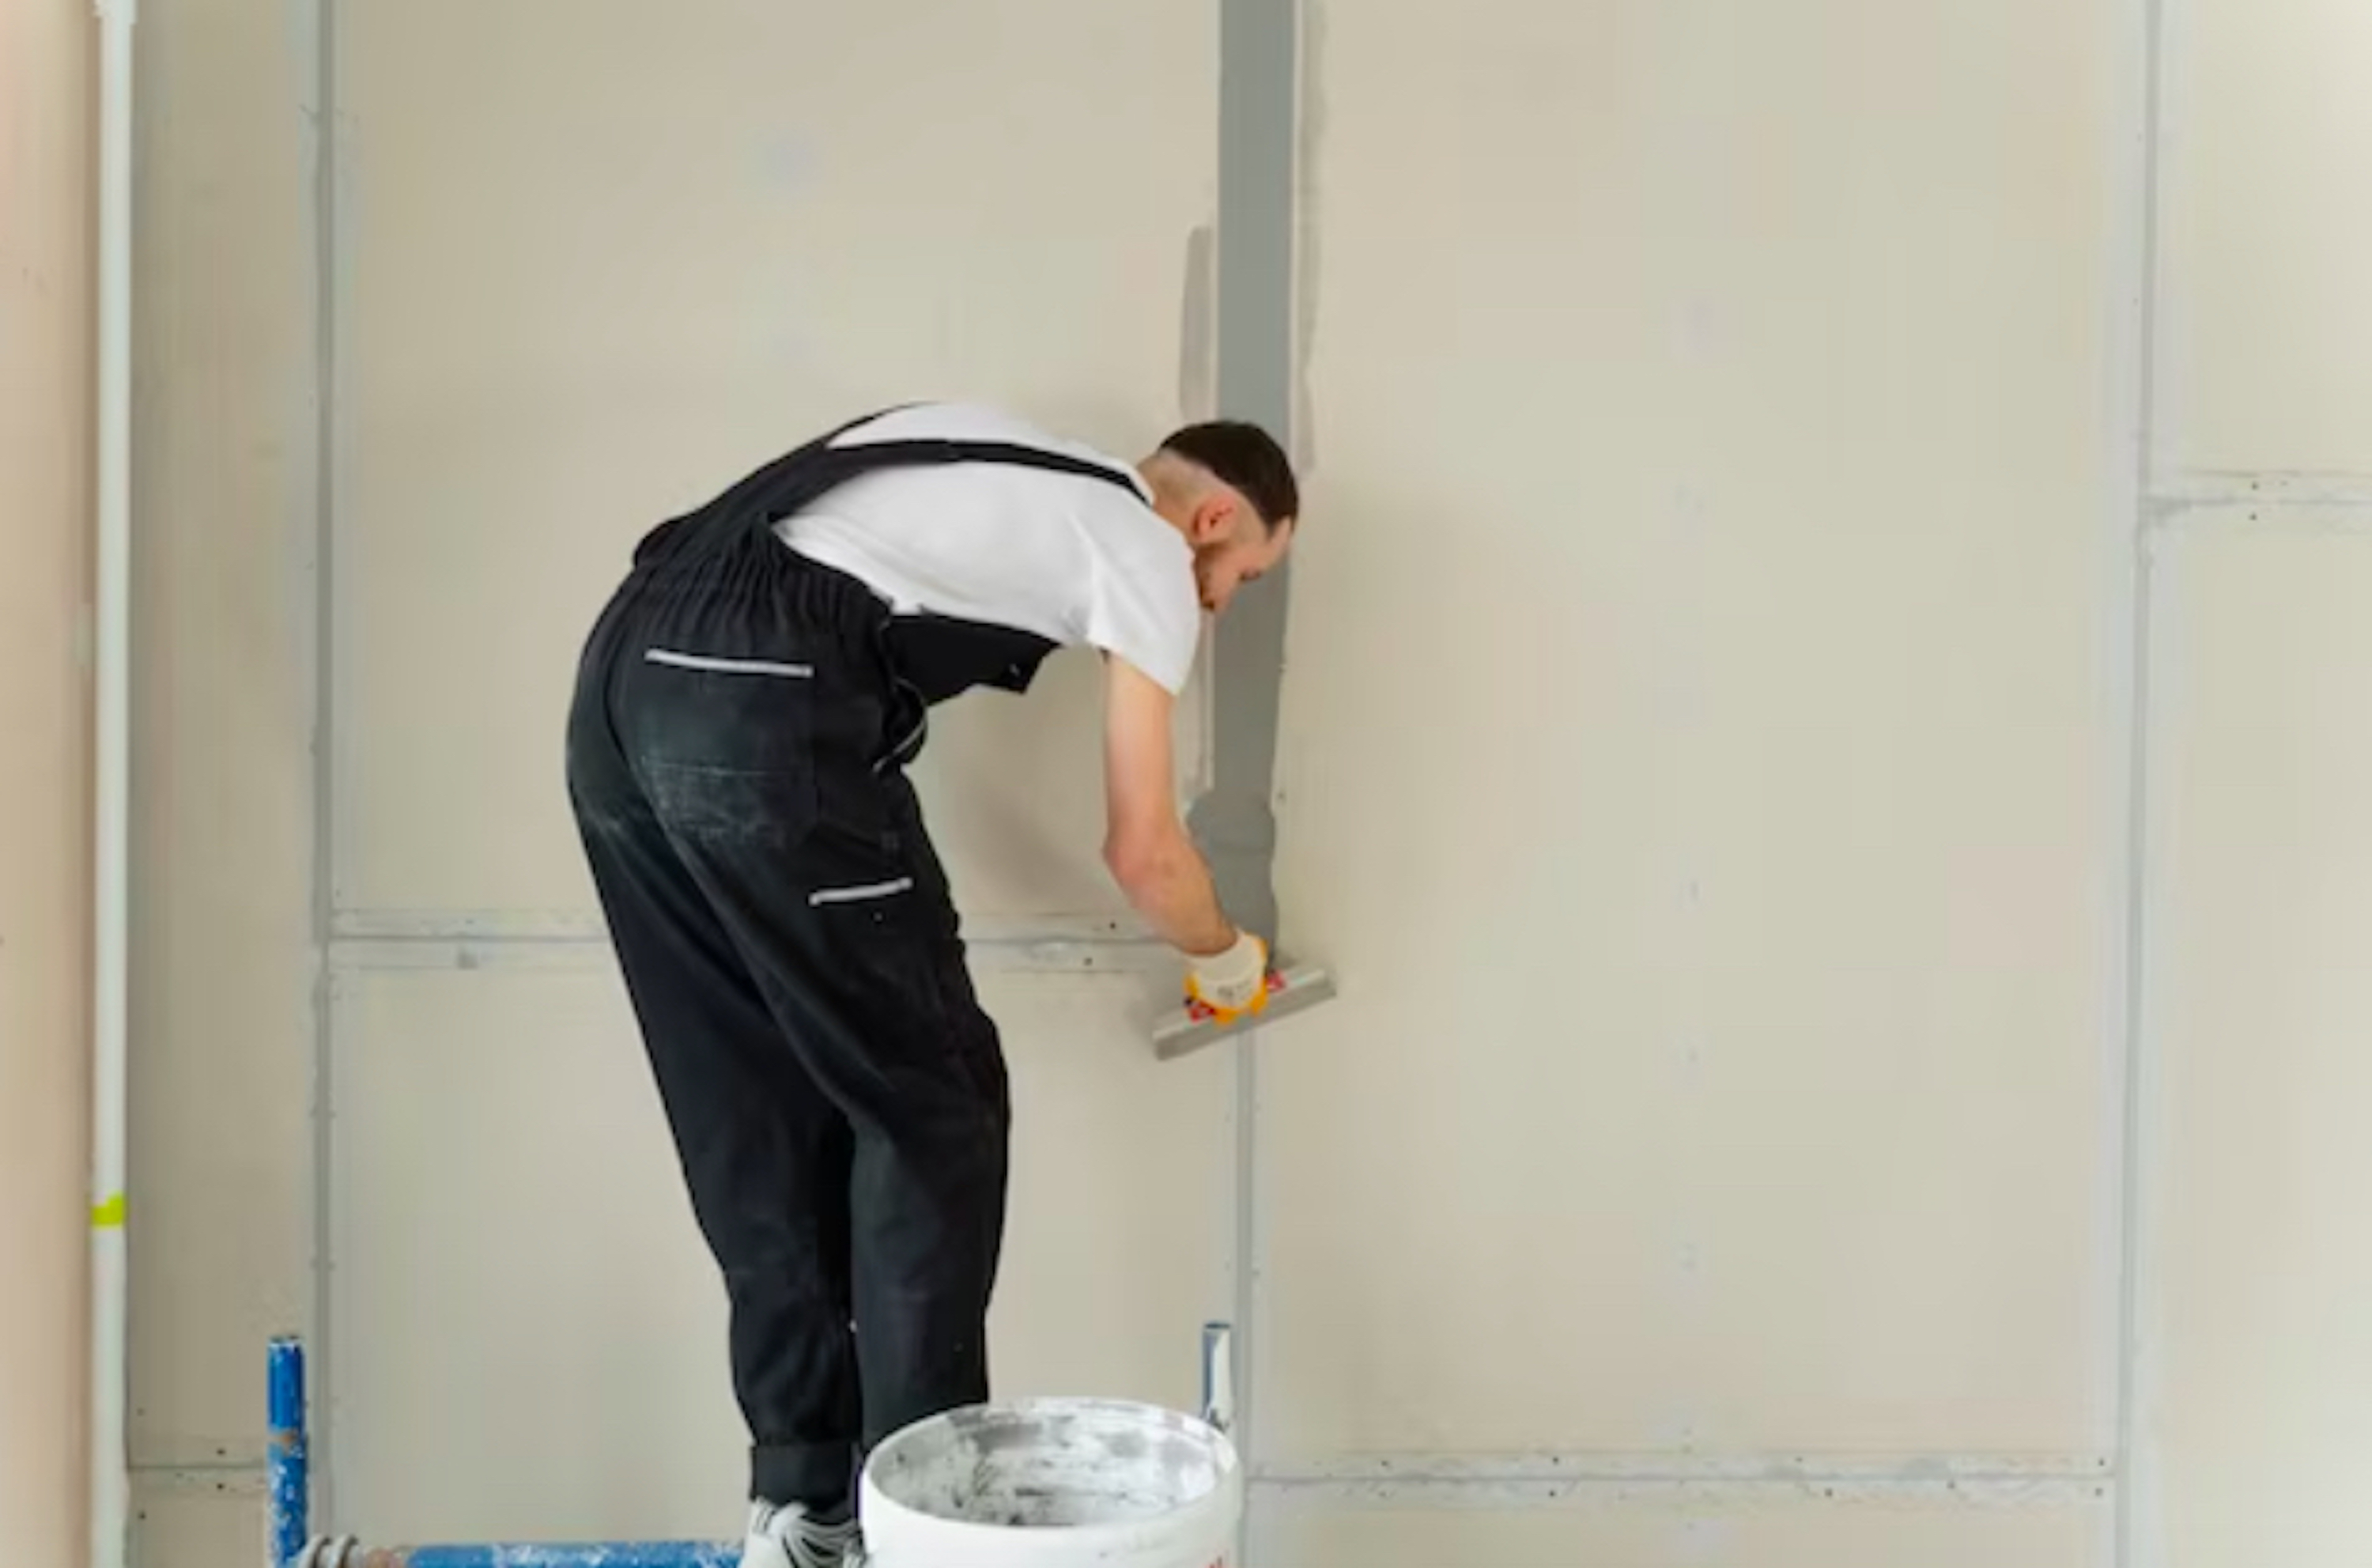 What Apprenticeships are Available for Plastering?